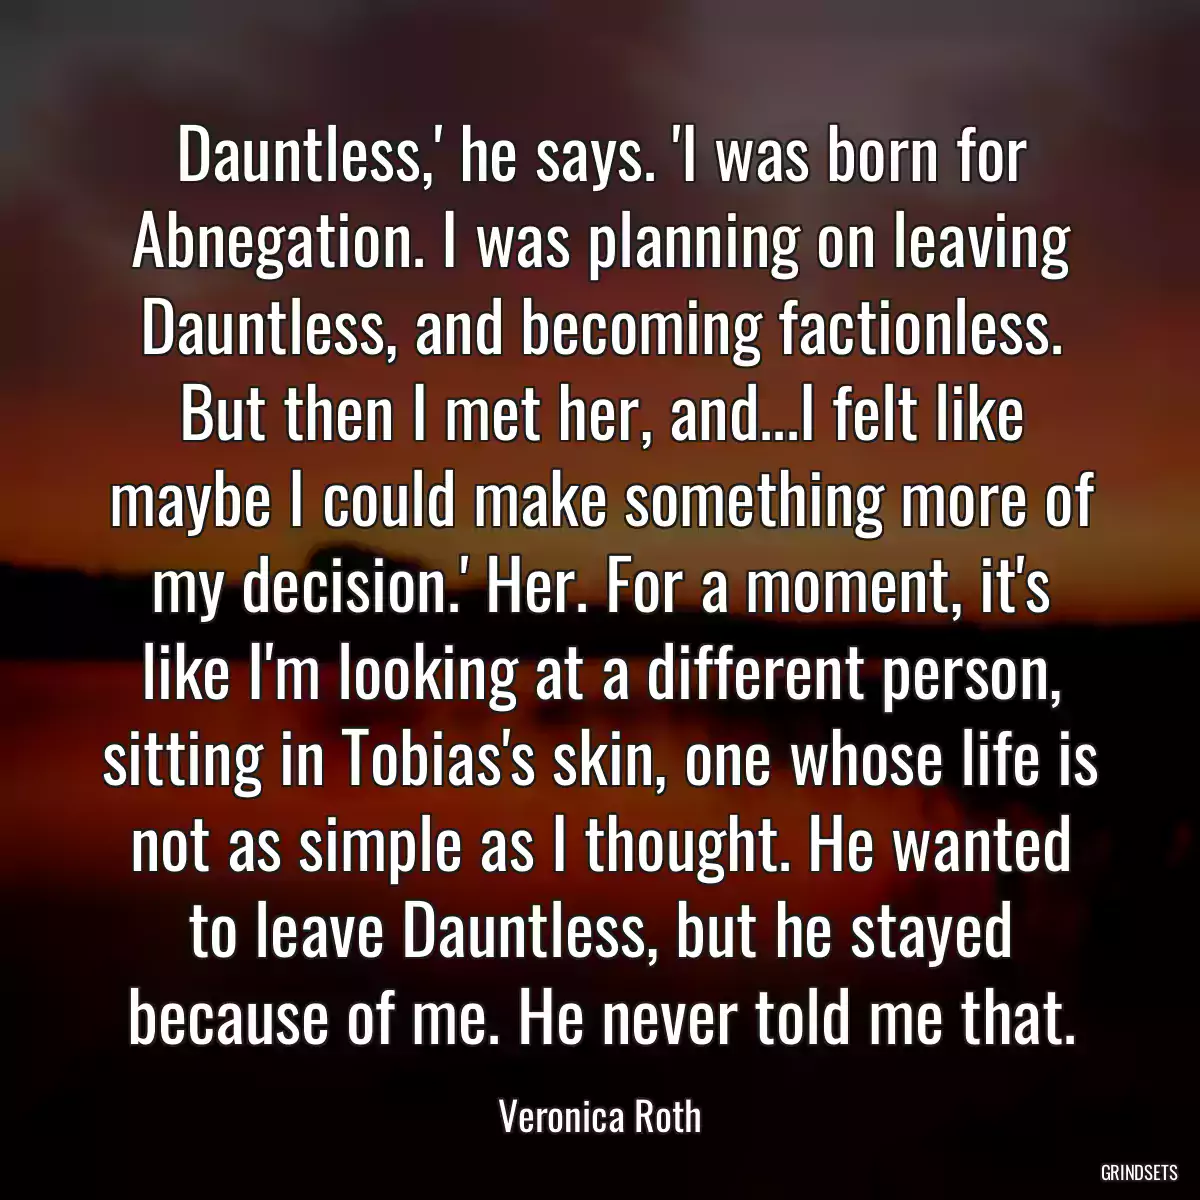 Dauntless,\' he says. \'I was born for Abnegation. I was planning on leaving Dauntless, and becoming factionless. But then I met her, and...I felt like maybe I could make something more of my decision.\' Her. For a moment, it\'s like I\'m looking at a different person, sitting in Tobias\'s skin, one whose life is not as simple as I thought. He wanted to leave Dauntless, but he stayed because of me. He never told me that.